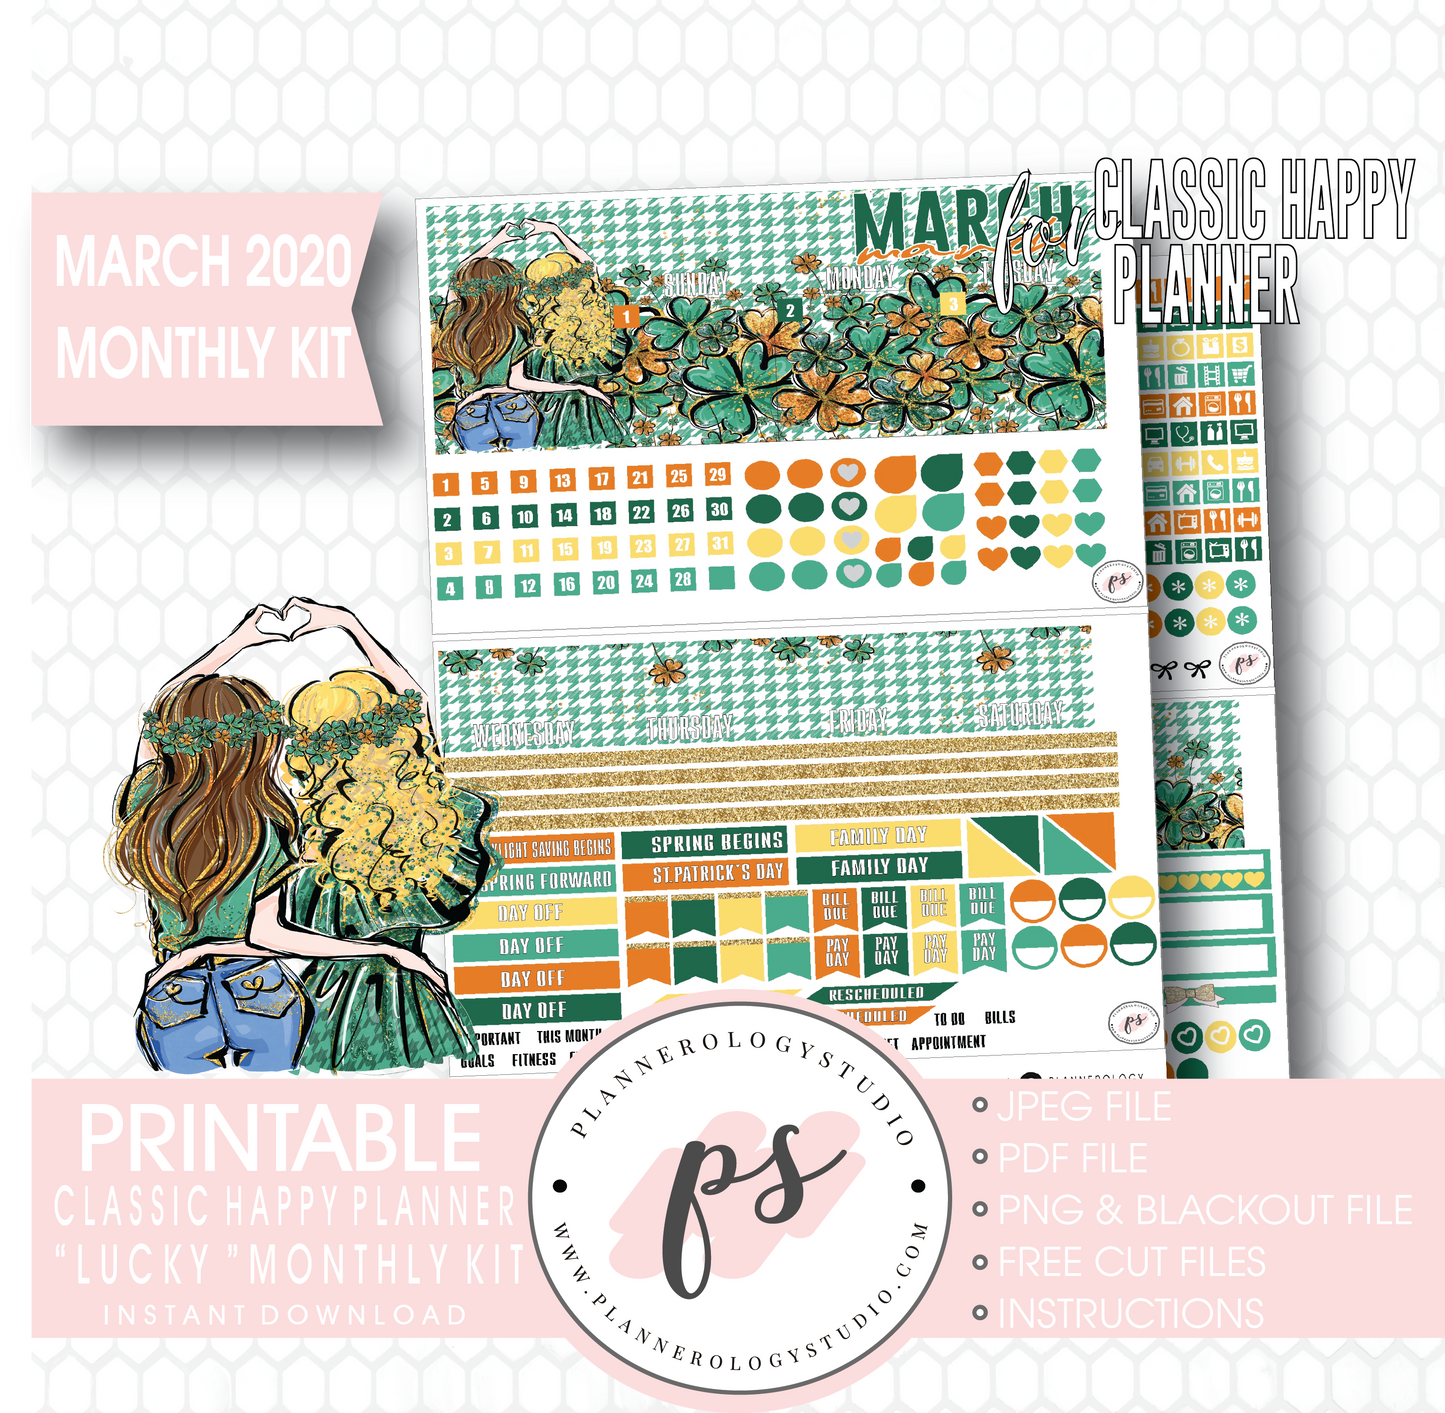 Lucky St Patrick's Day March 2020 Monthly View Kit Digital Printable Planner Stickers (for use with Classic Happy Planner) - Plannerologystudio